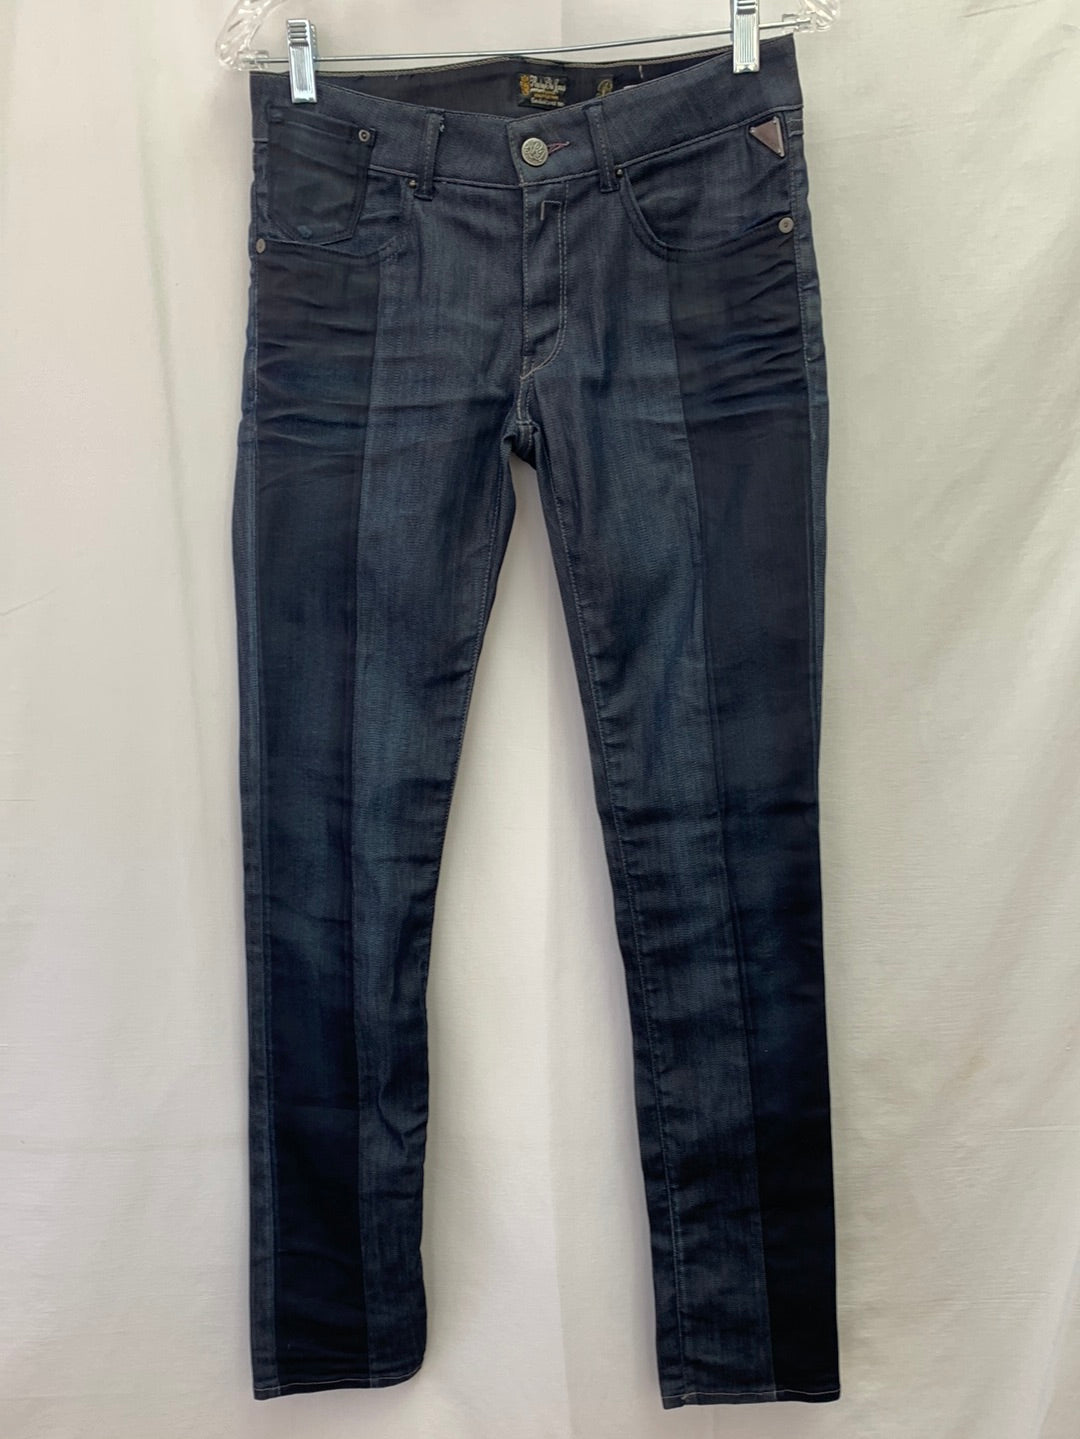 REPLAY BLUE JEANS dark wash Panel Stripe Mid Rise 'Ranidae' Jeans - 30x32